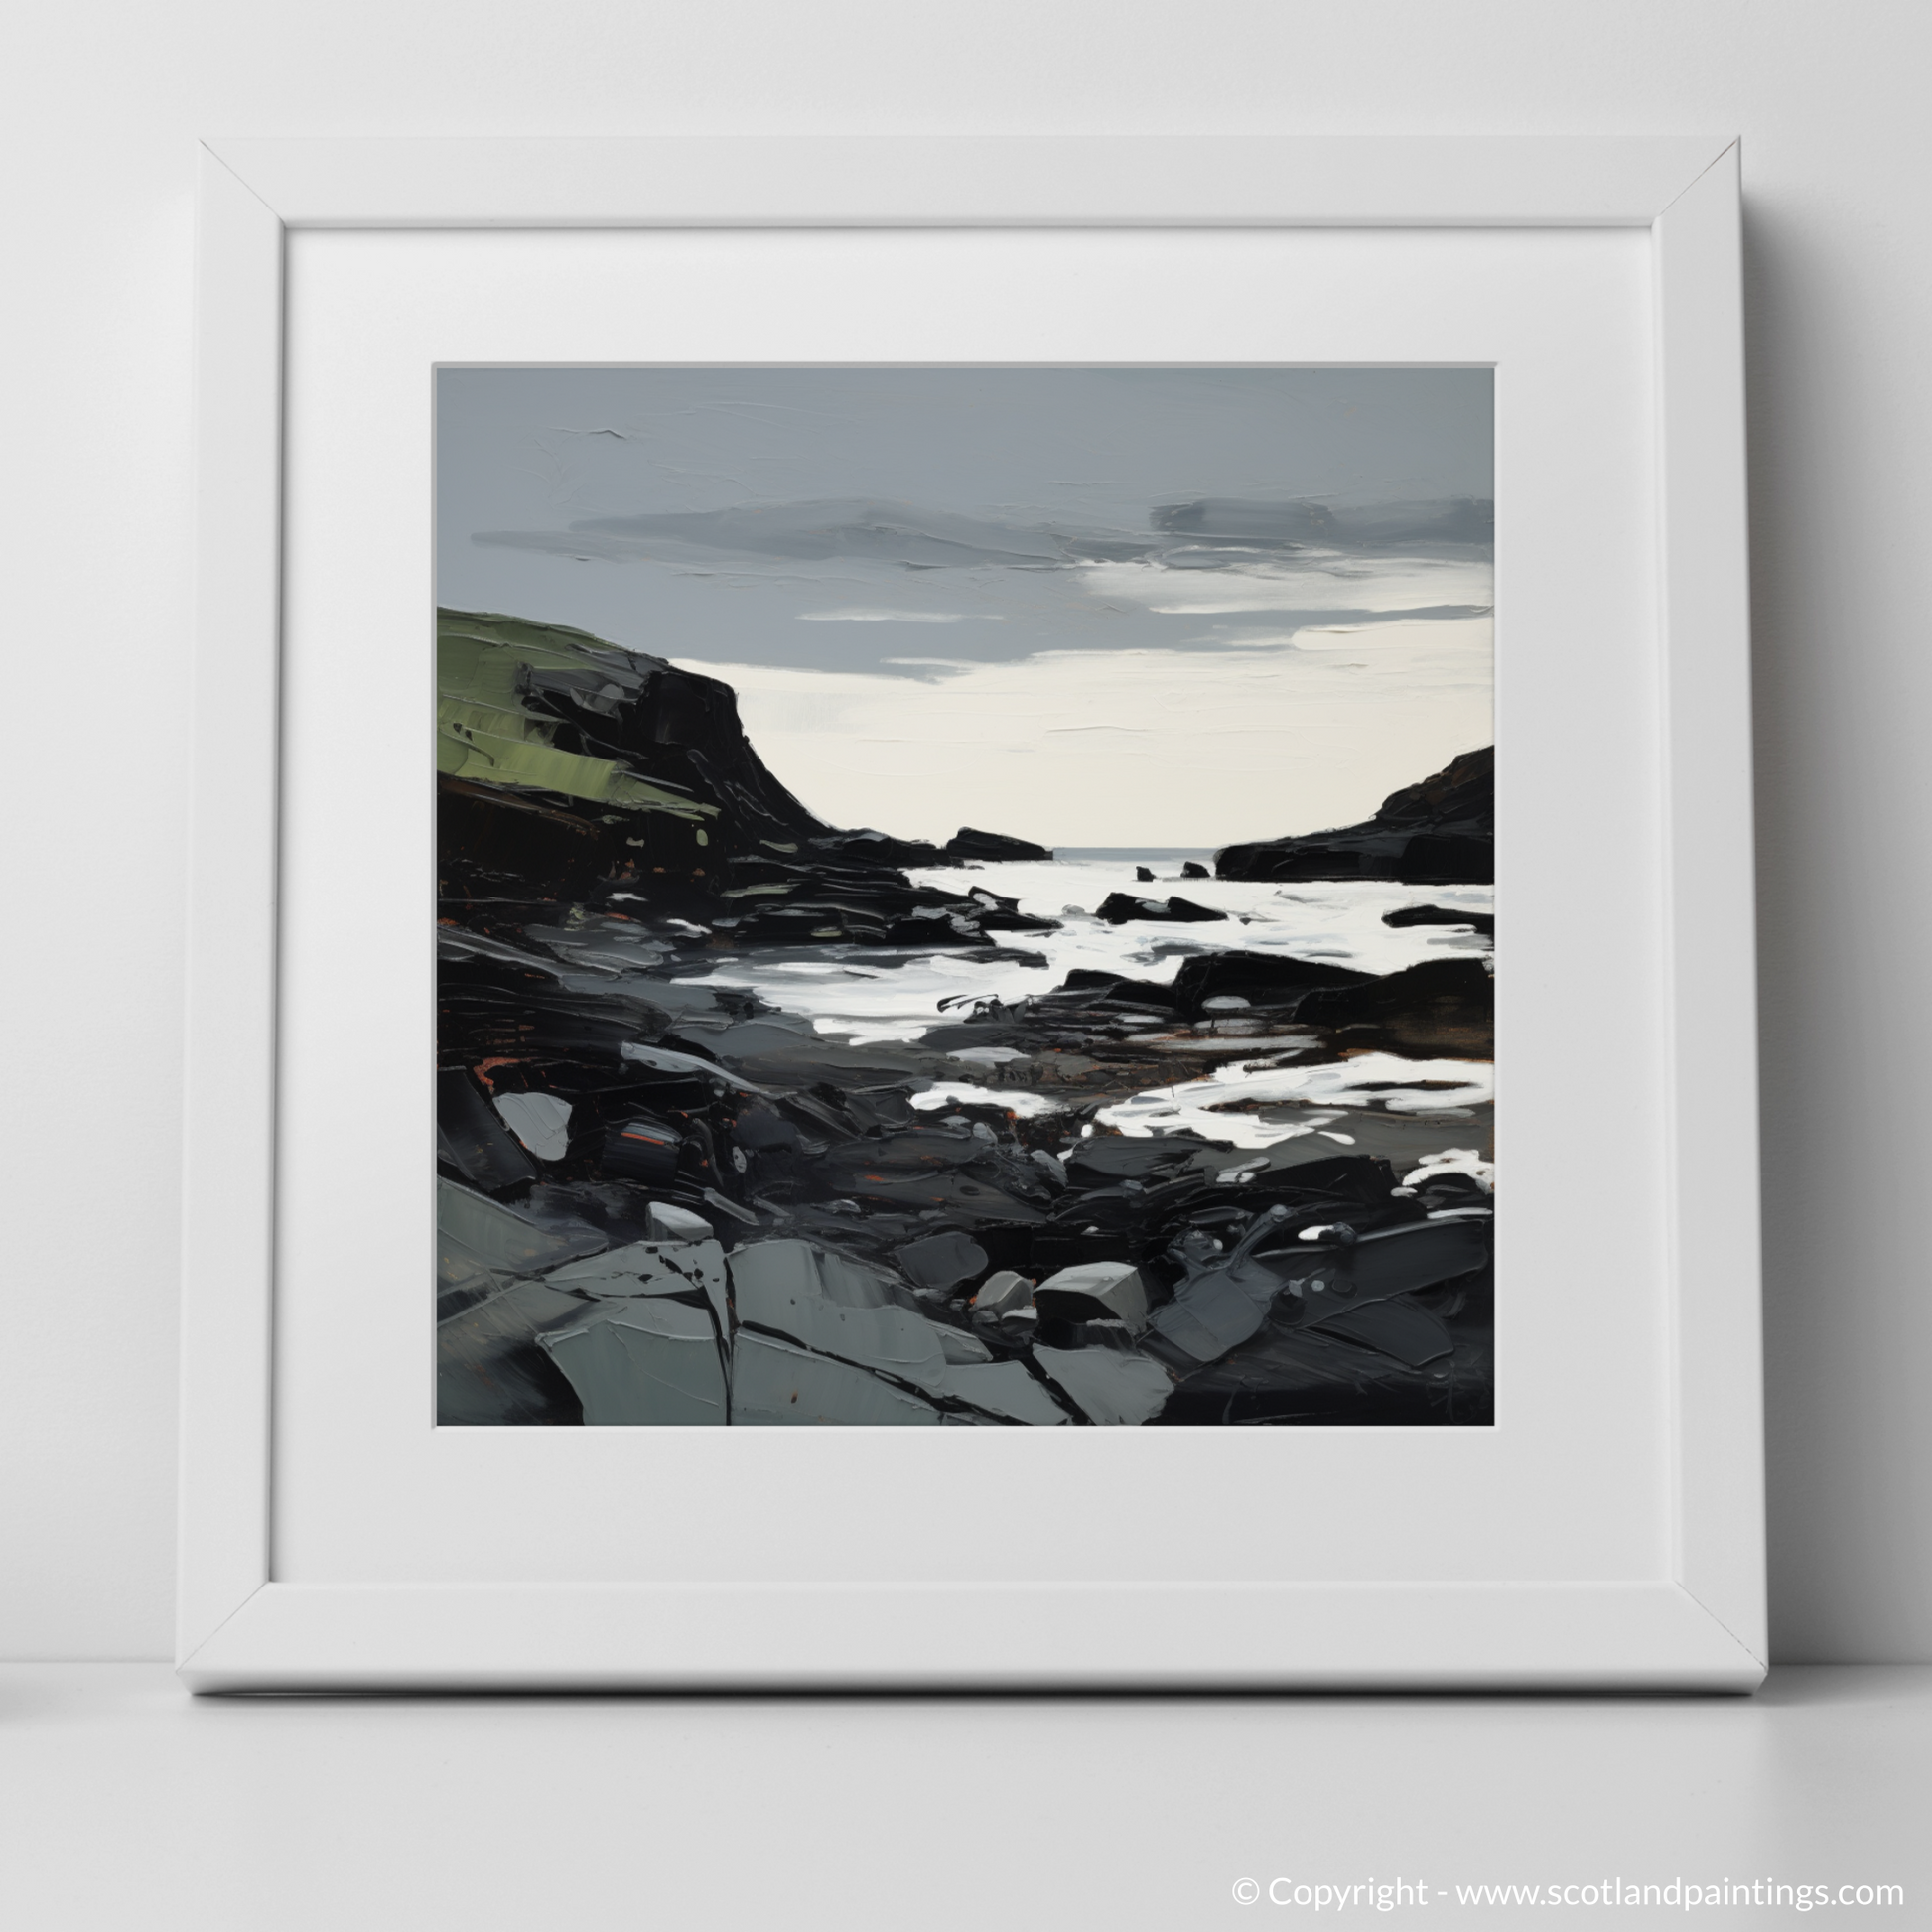 Art Print of Catterline Bay, Aberdeenshire with a white frame